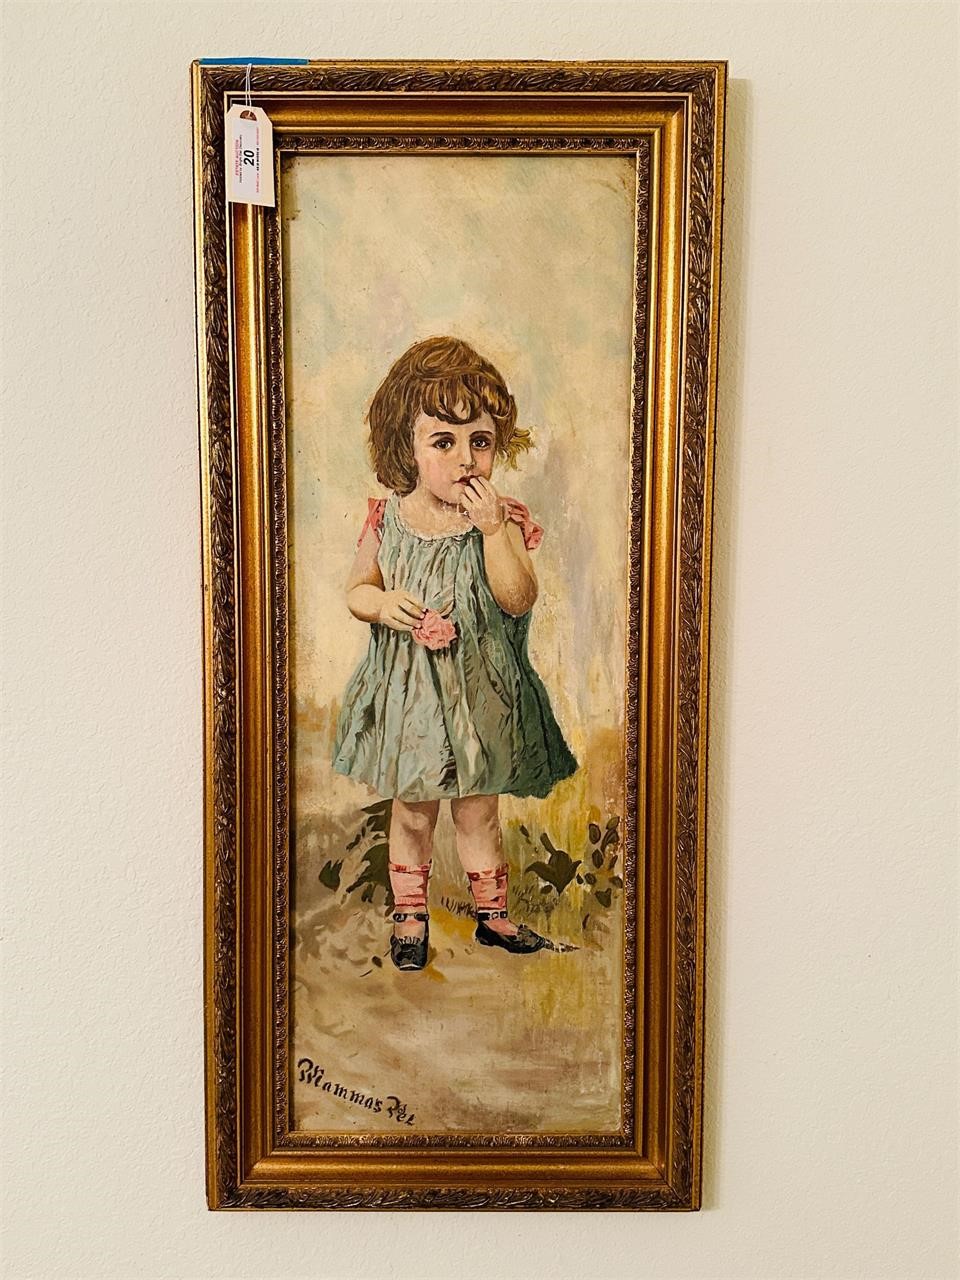 Framed Early Child Oil Painting on Canvas - O/C